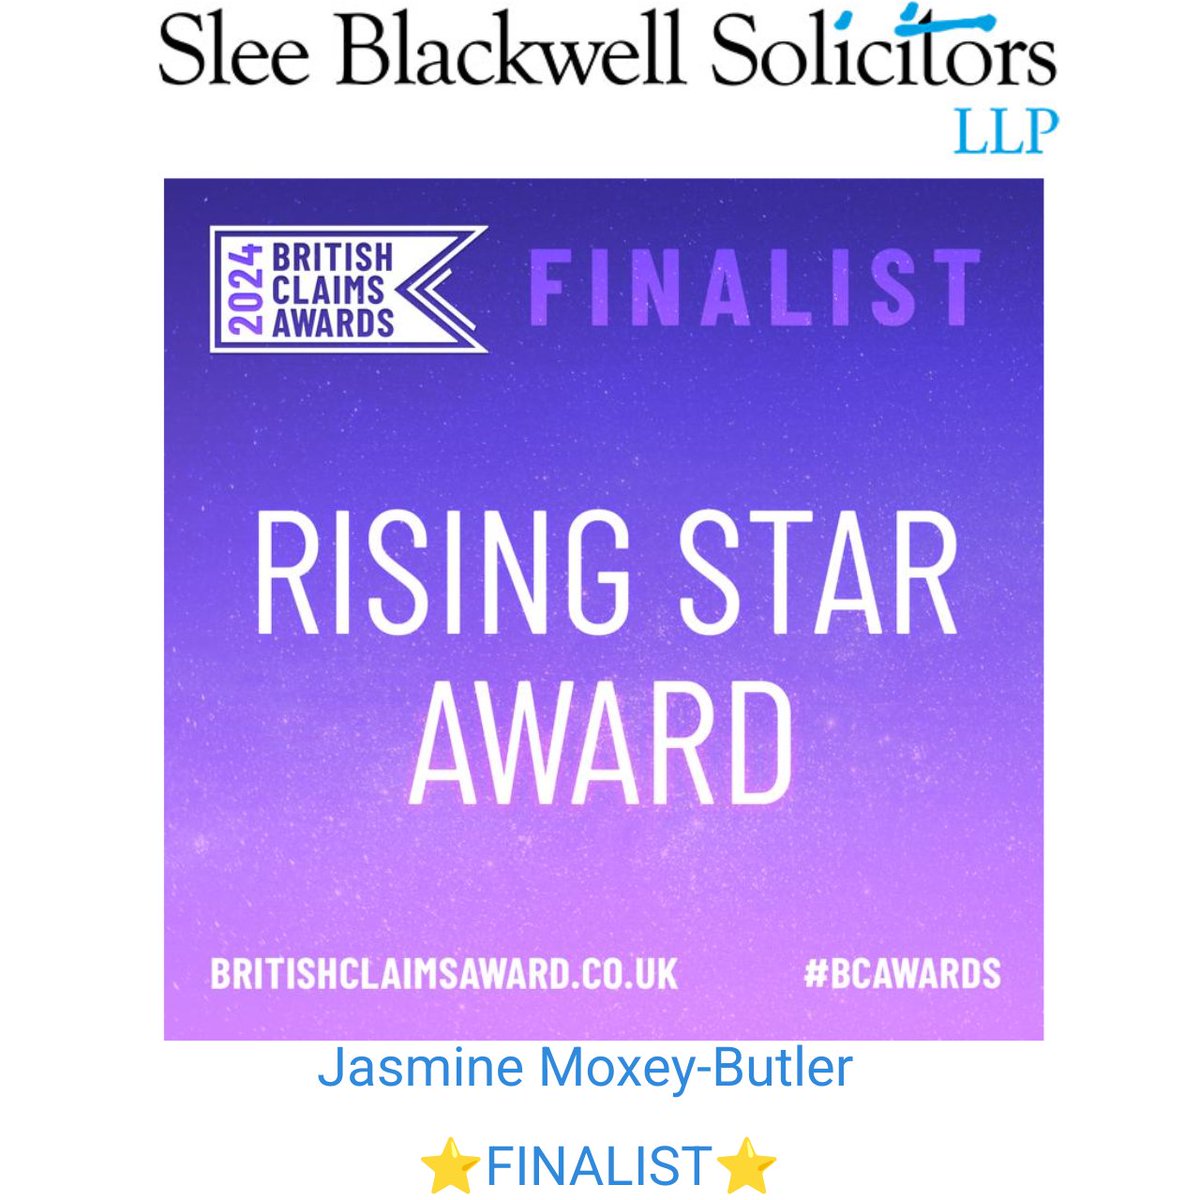 🌟 We're thrilled to announce that our very own Jasmine Moxey-Butler has been shortlisted for the Rising Star Award at the British Claim Awards! 🏆🎉 Join us in congratulating Jasmine for this well-deserved recognition of her hard work and dedication. #RisingStar #bcawards 🌟